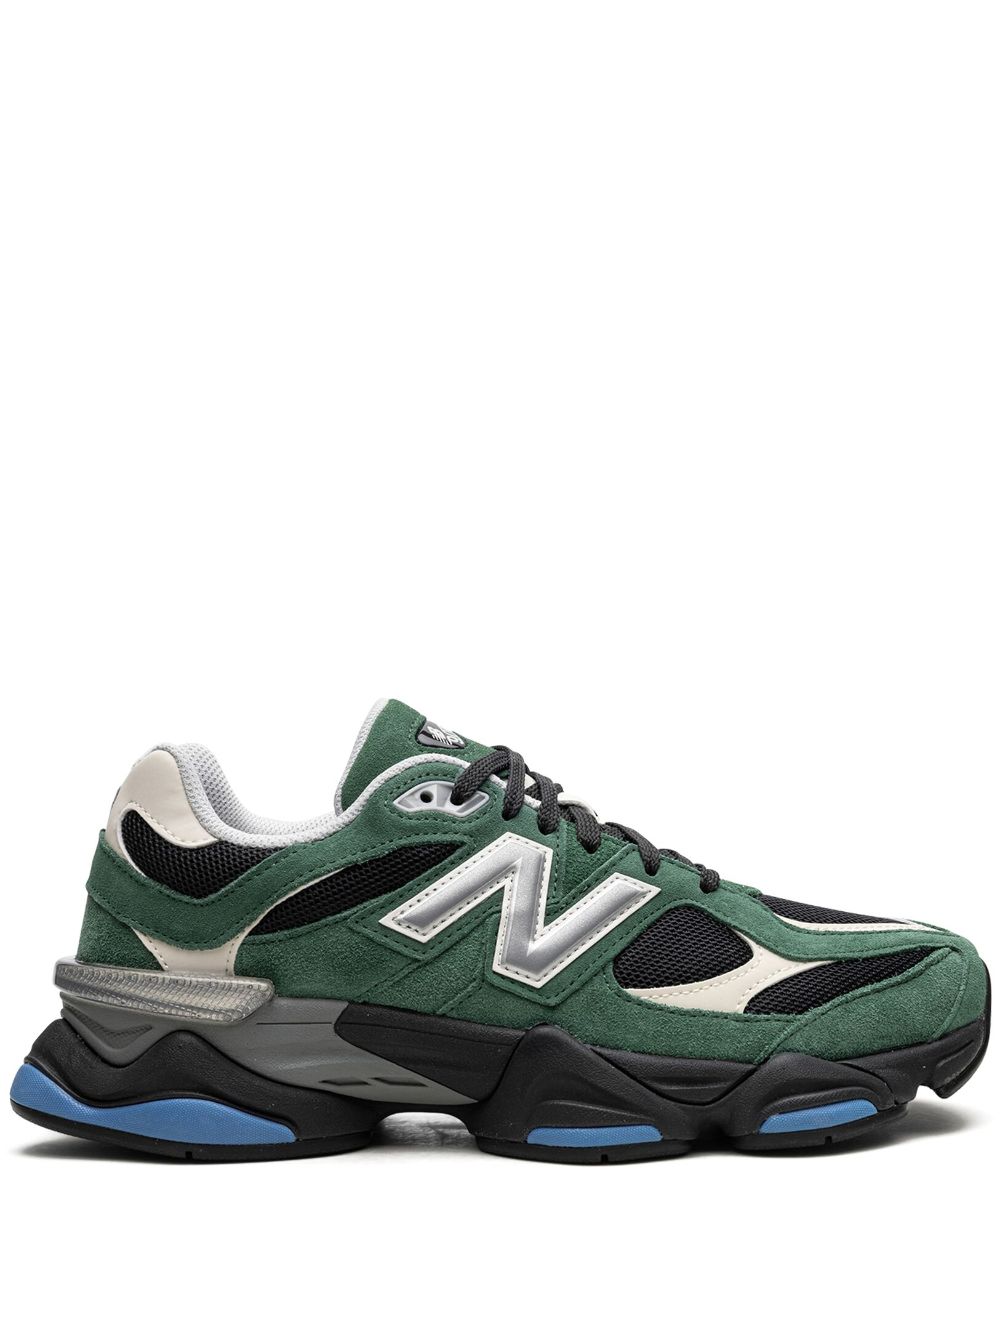 New Balance 9060 low-top sneakers - Green